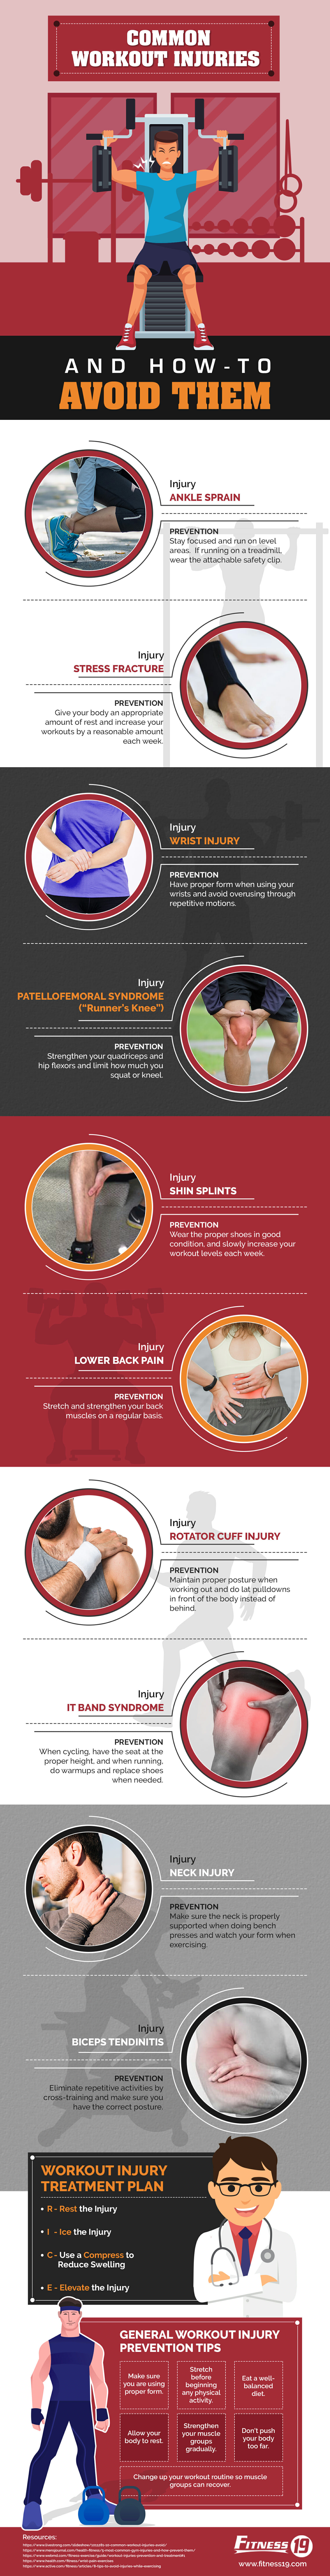 Common Workout Injuries and how to avoid them.